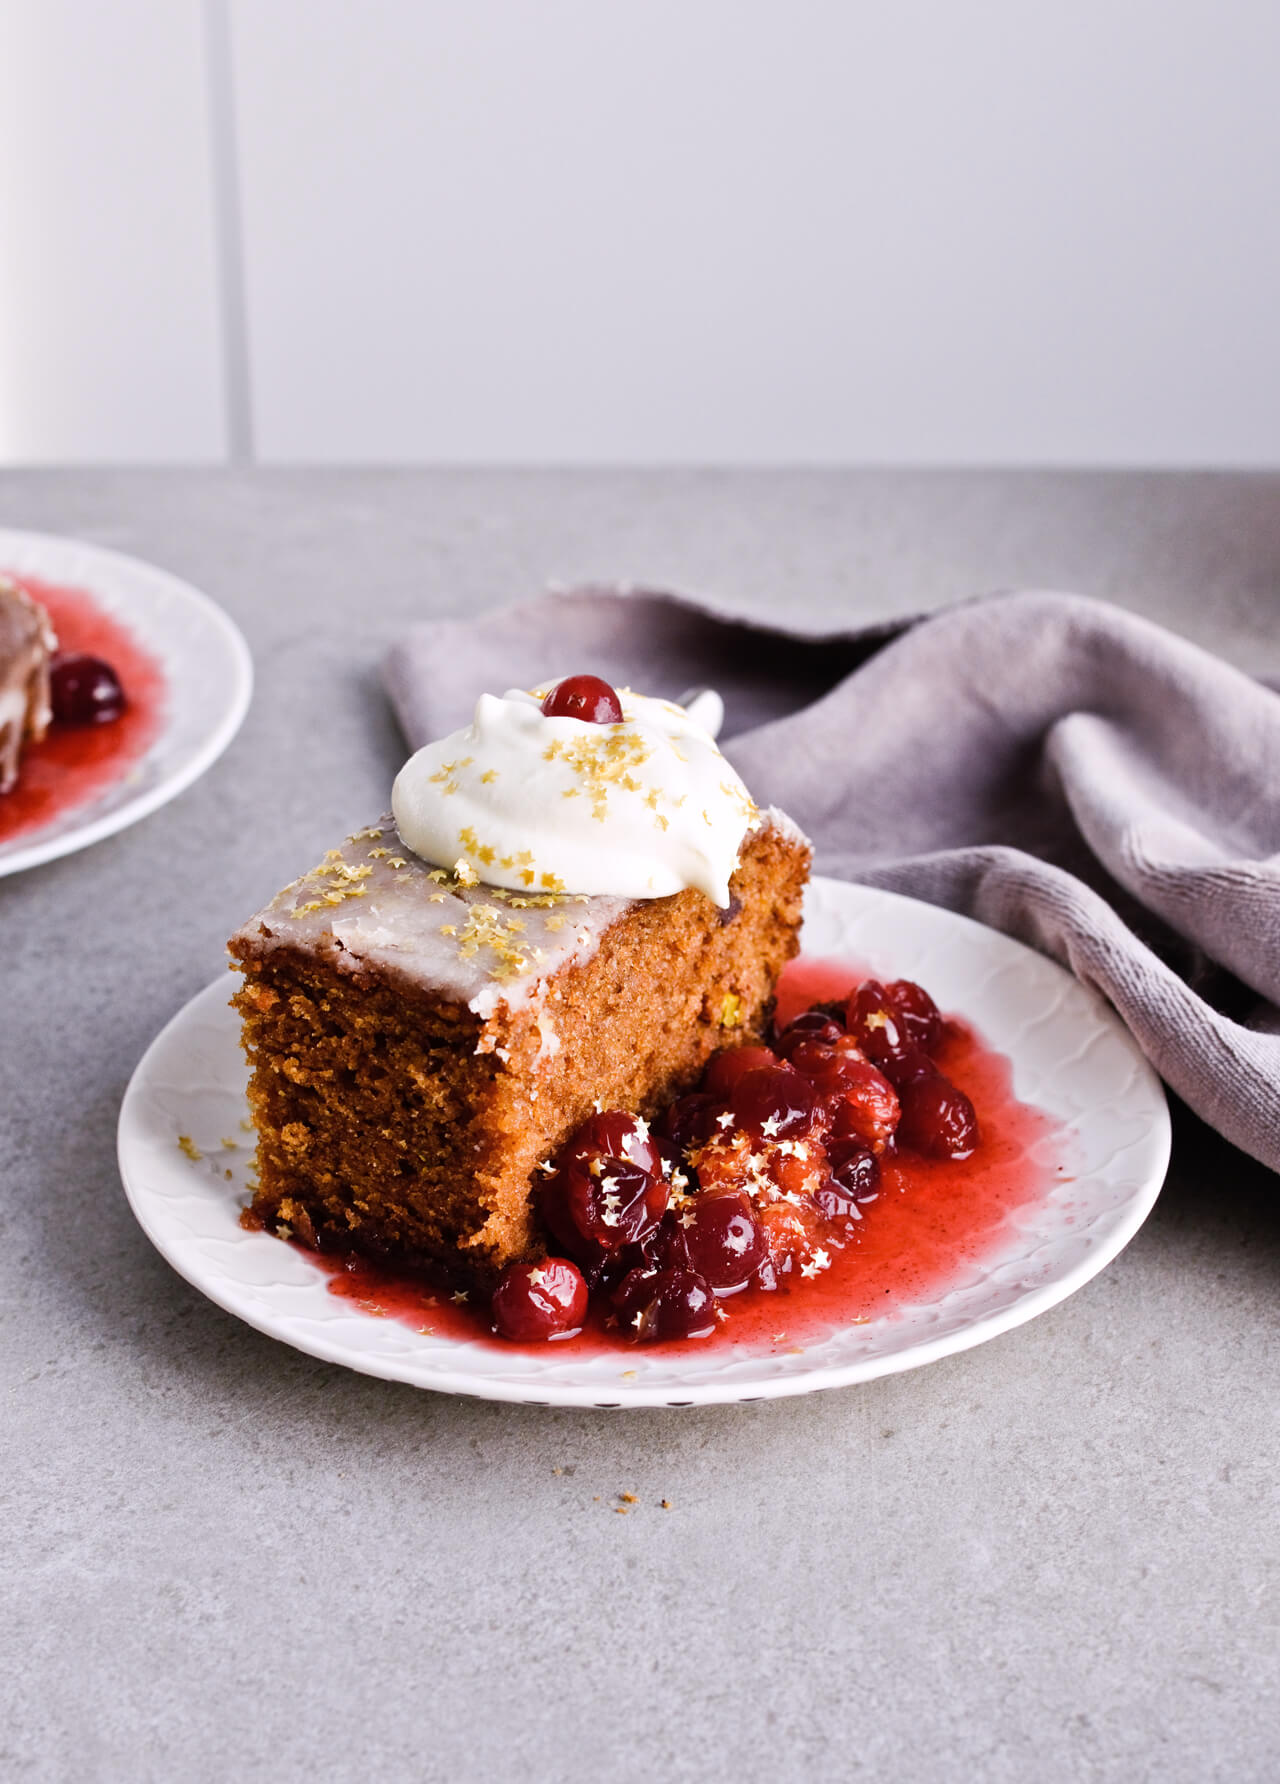 Recipe for Citrus pistachio spice cake with lemon sugar glaze, cranberry compote and homemade whipped cream. Full of cinnamon and cardamom, it almost tastes like lebkuchen. Perfect holiday treat, can be made ahead. | sugarsalted.com